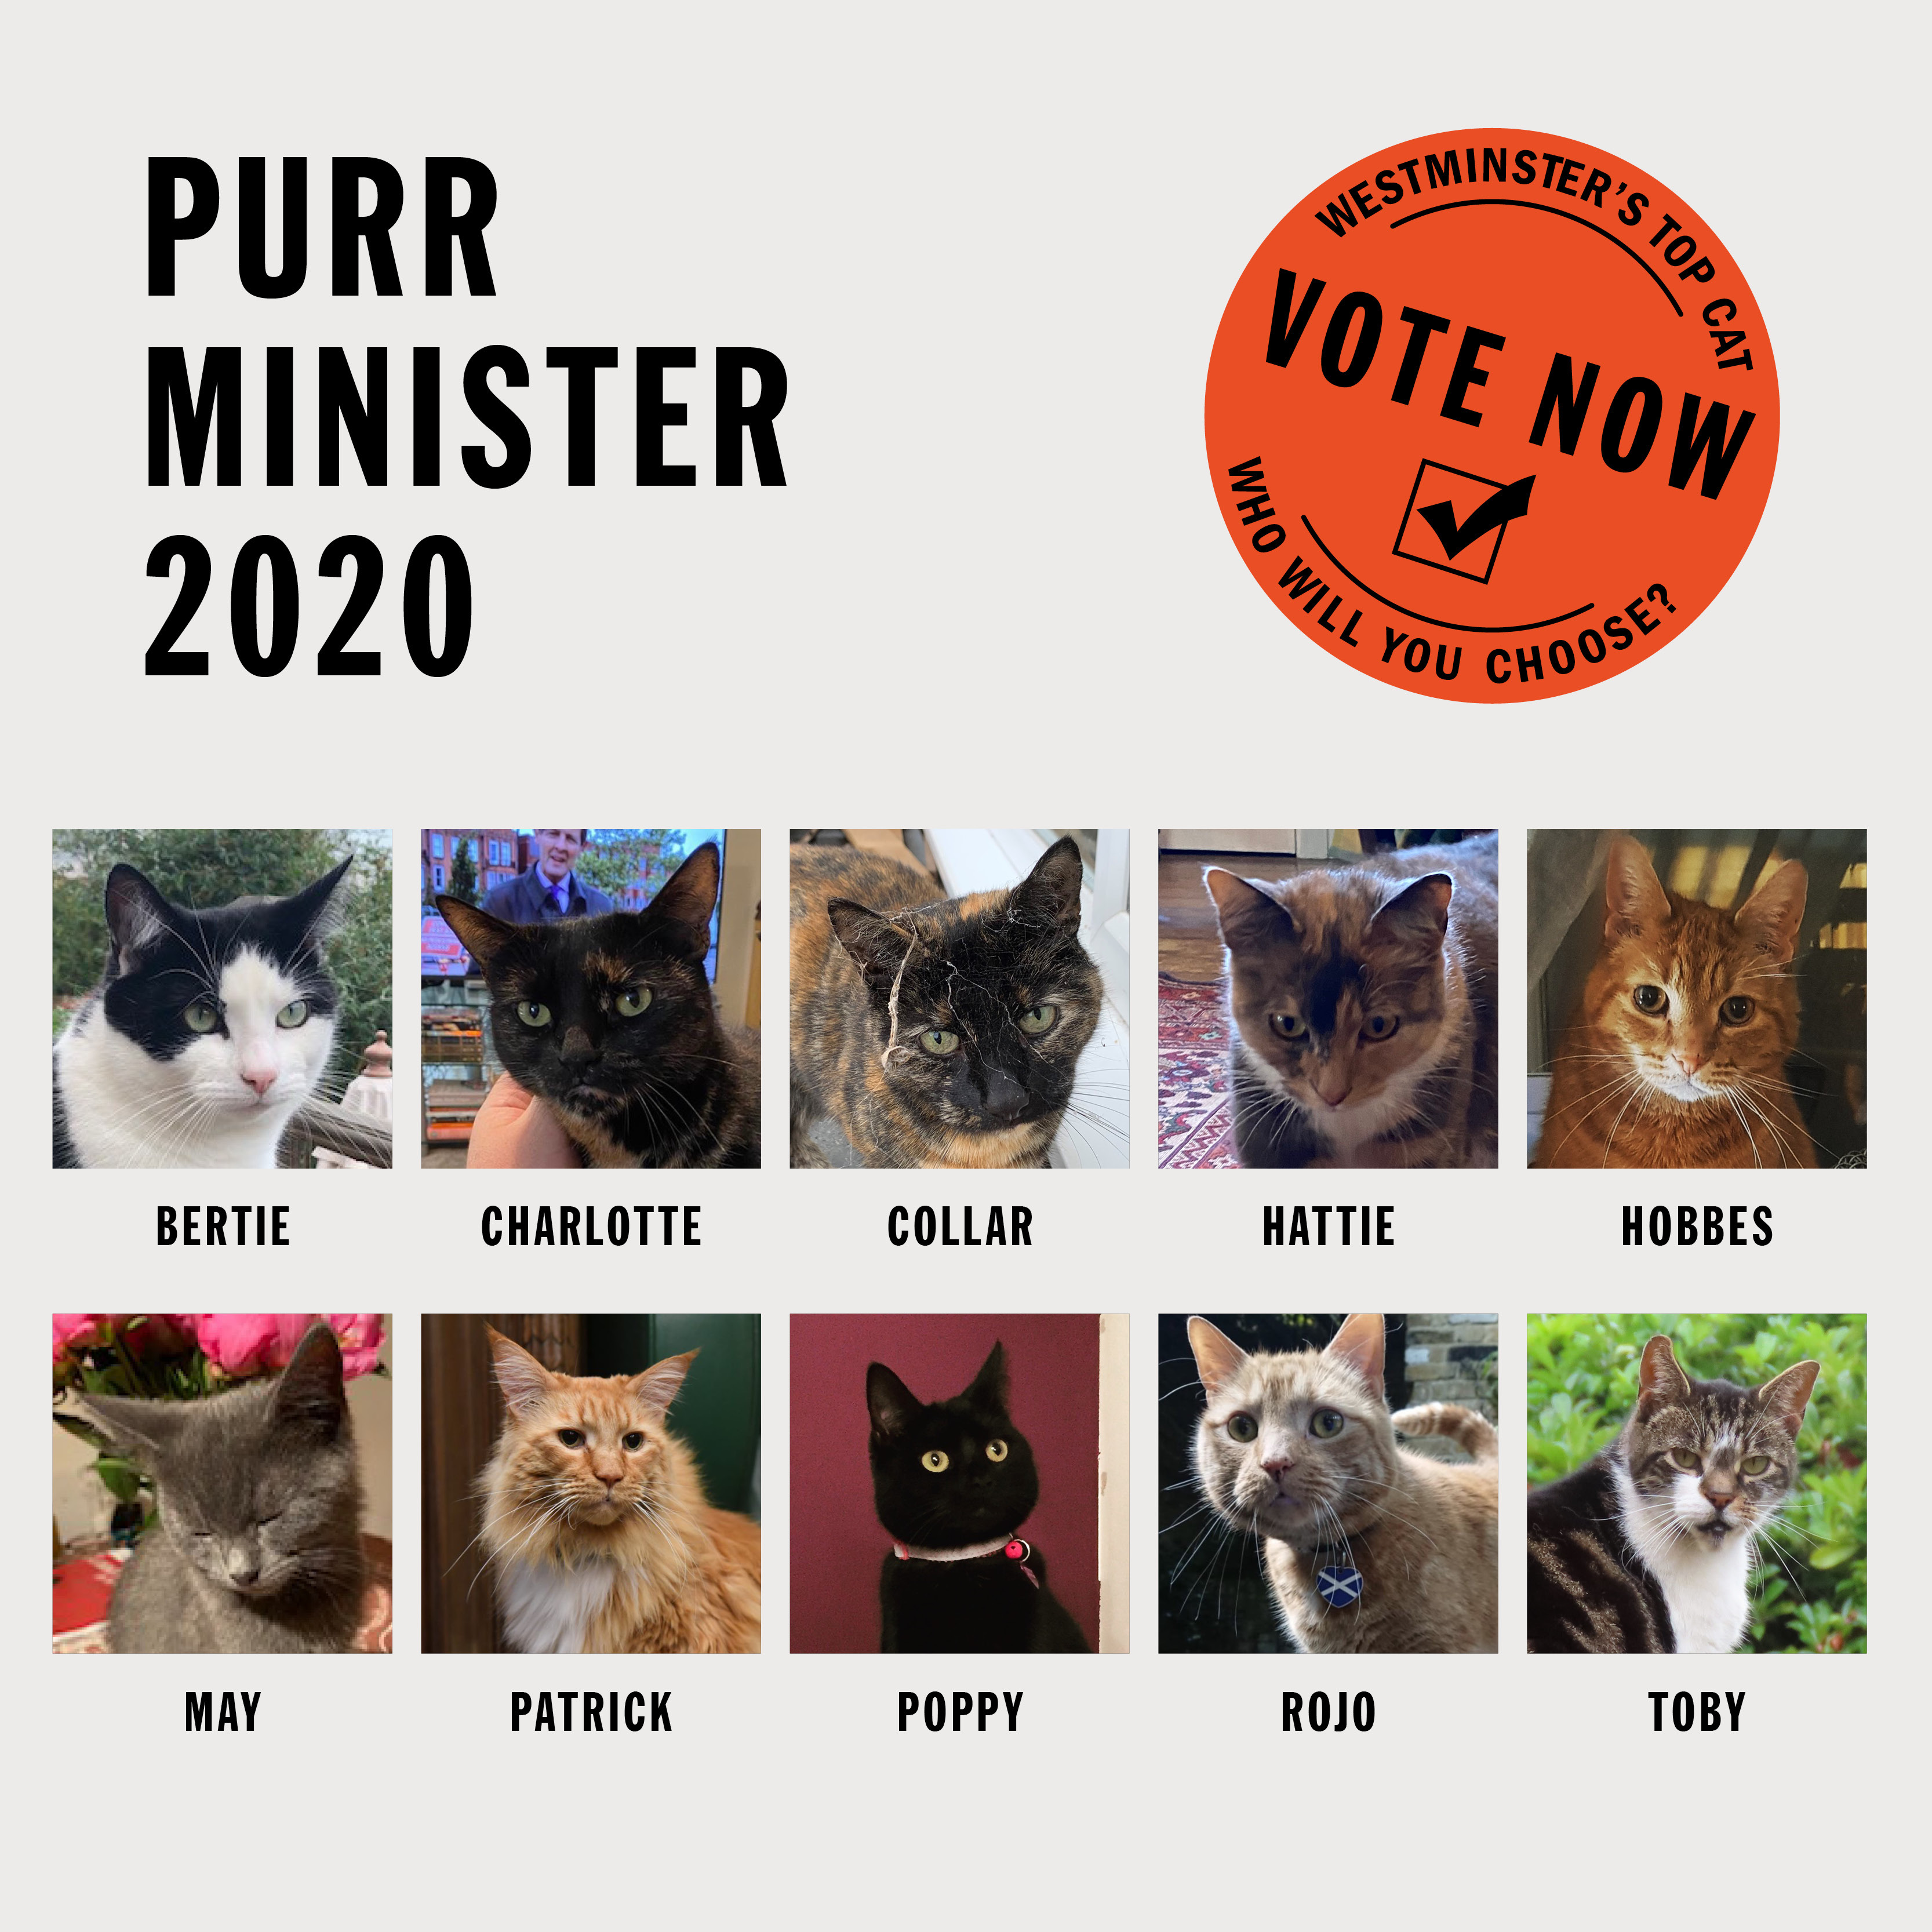 Pictures of the Paw-minister candidates